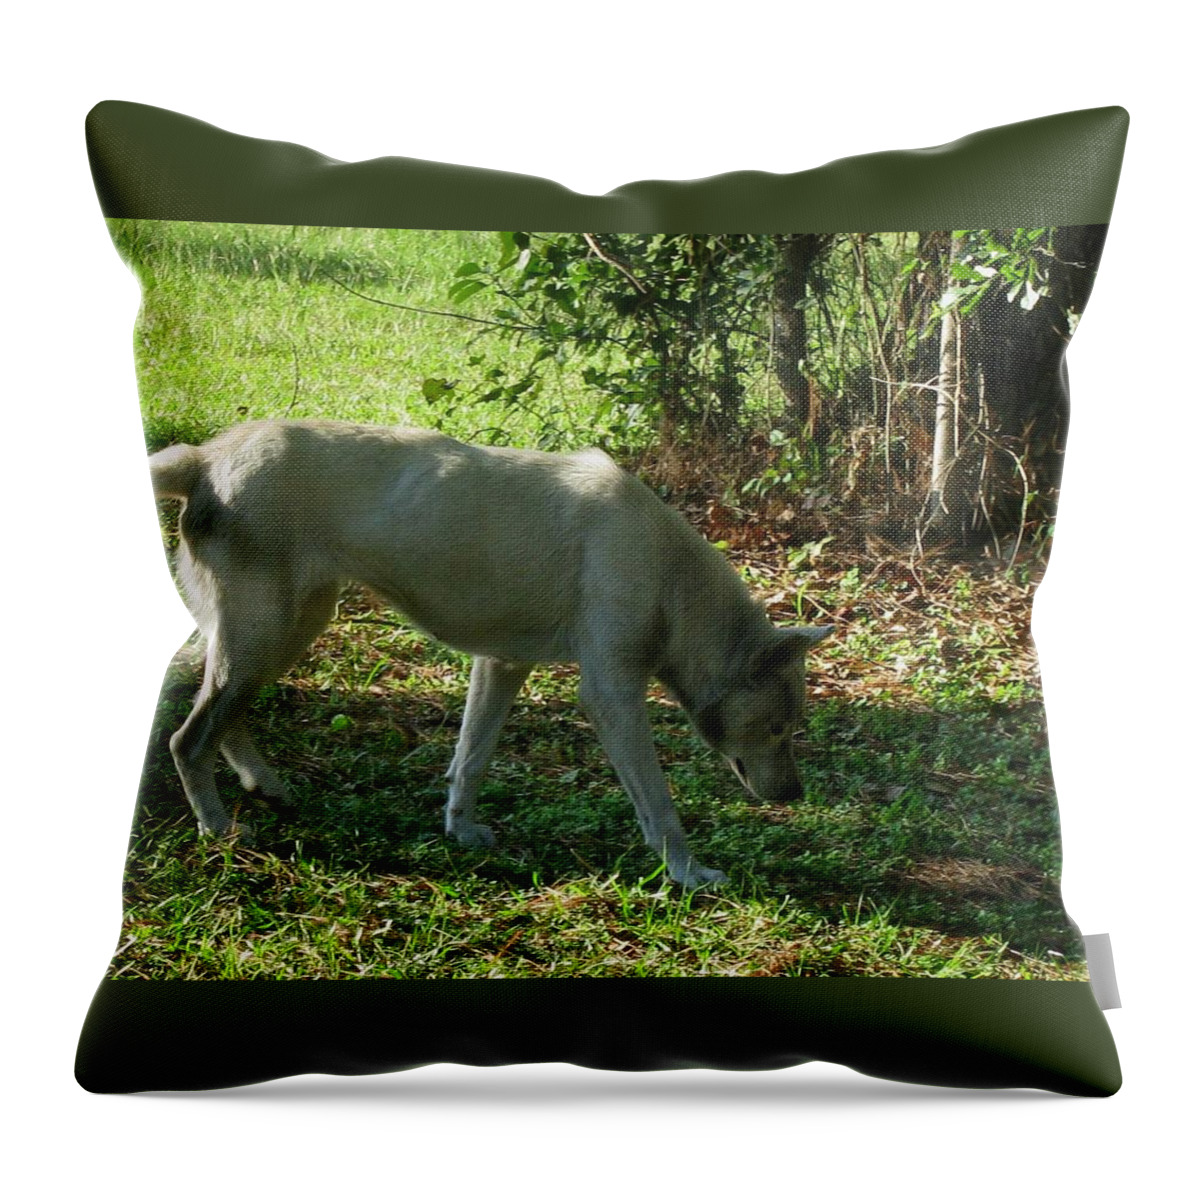 Wolf Throw Pillow featuring the photograph The Tracker by Maria Urso